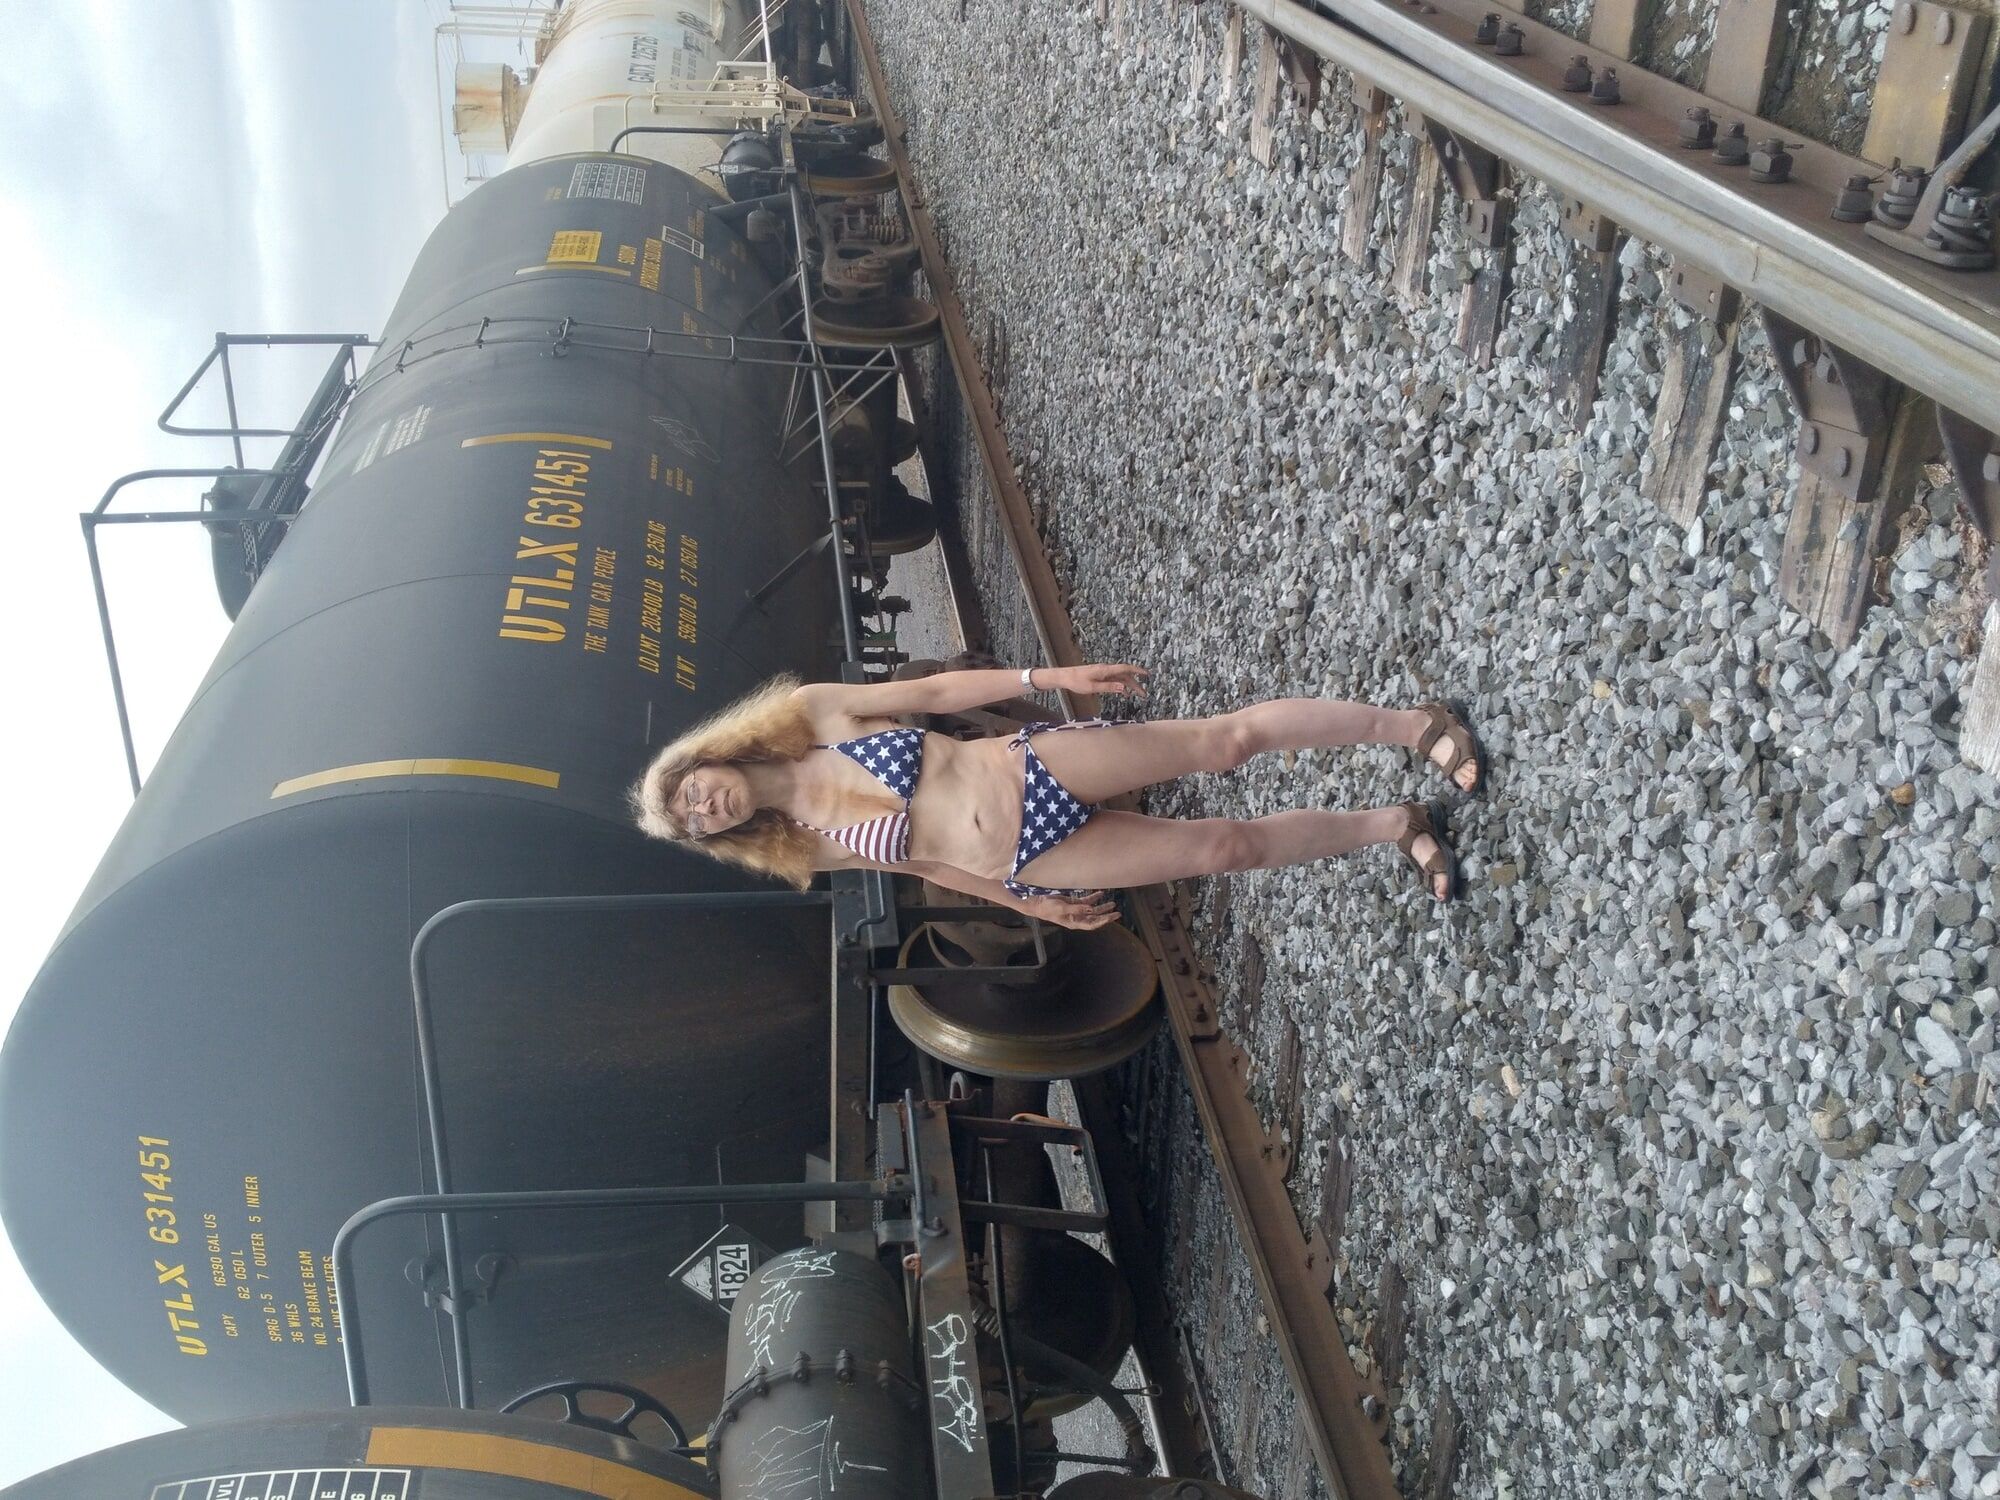 American Train. July 4th release. My best photo set to date. #24